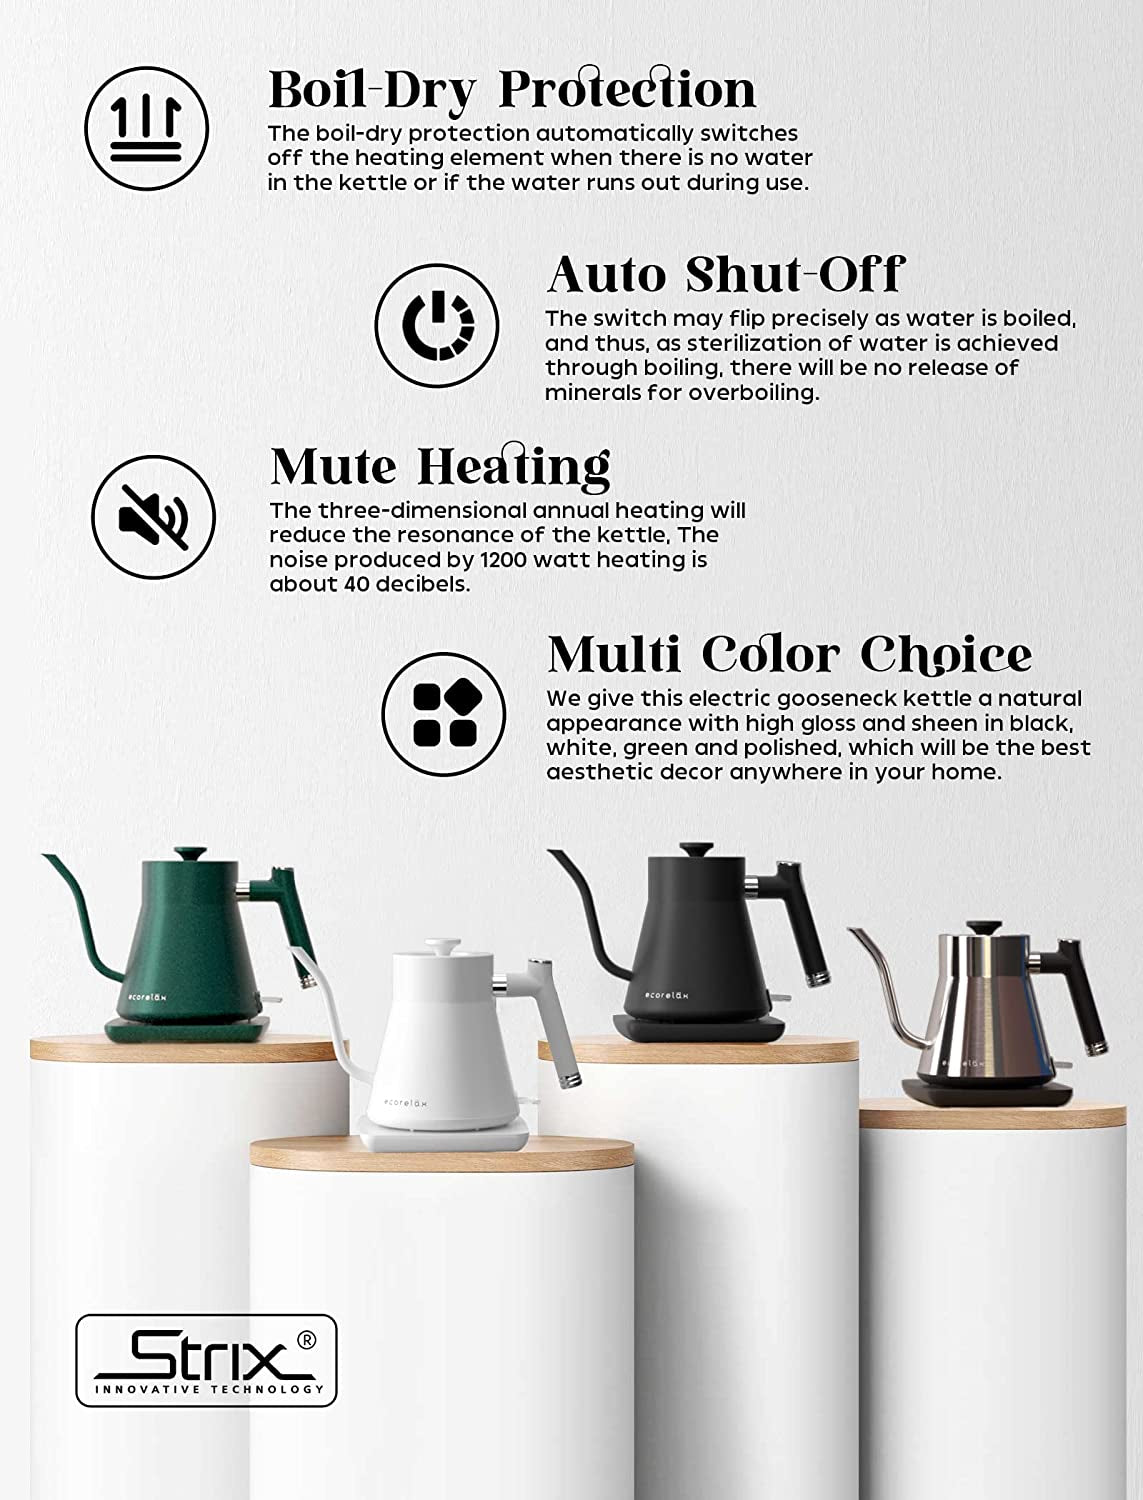  Gooseneck Electric Kettle - Stainless Steel, Rapid Heating, Strix Boil-Dry Protection, 0.8L Capacity, Matte White